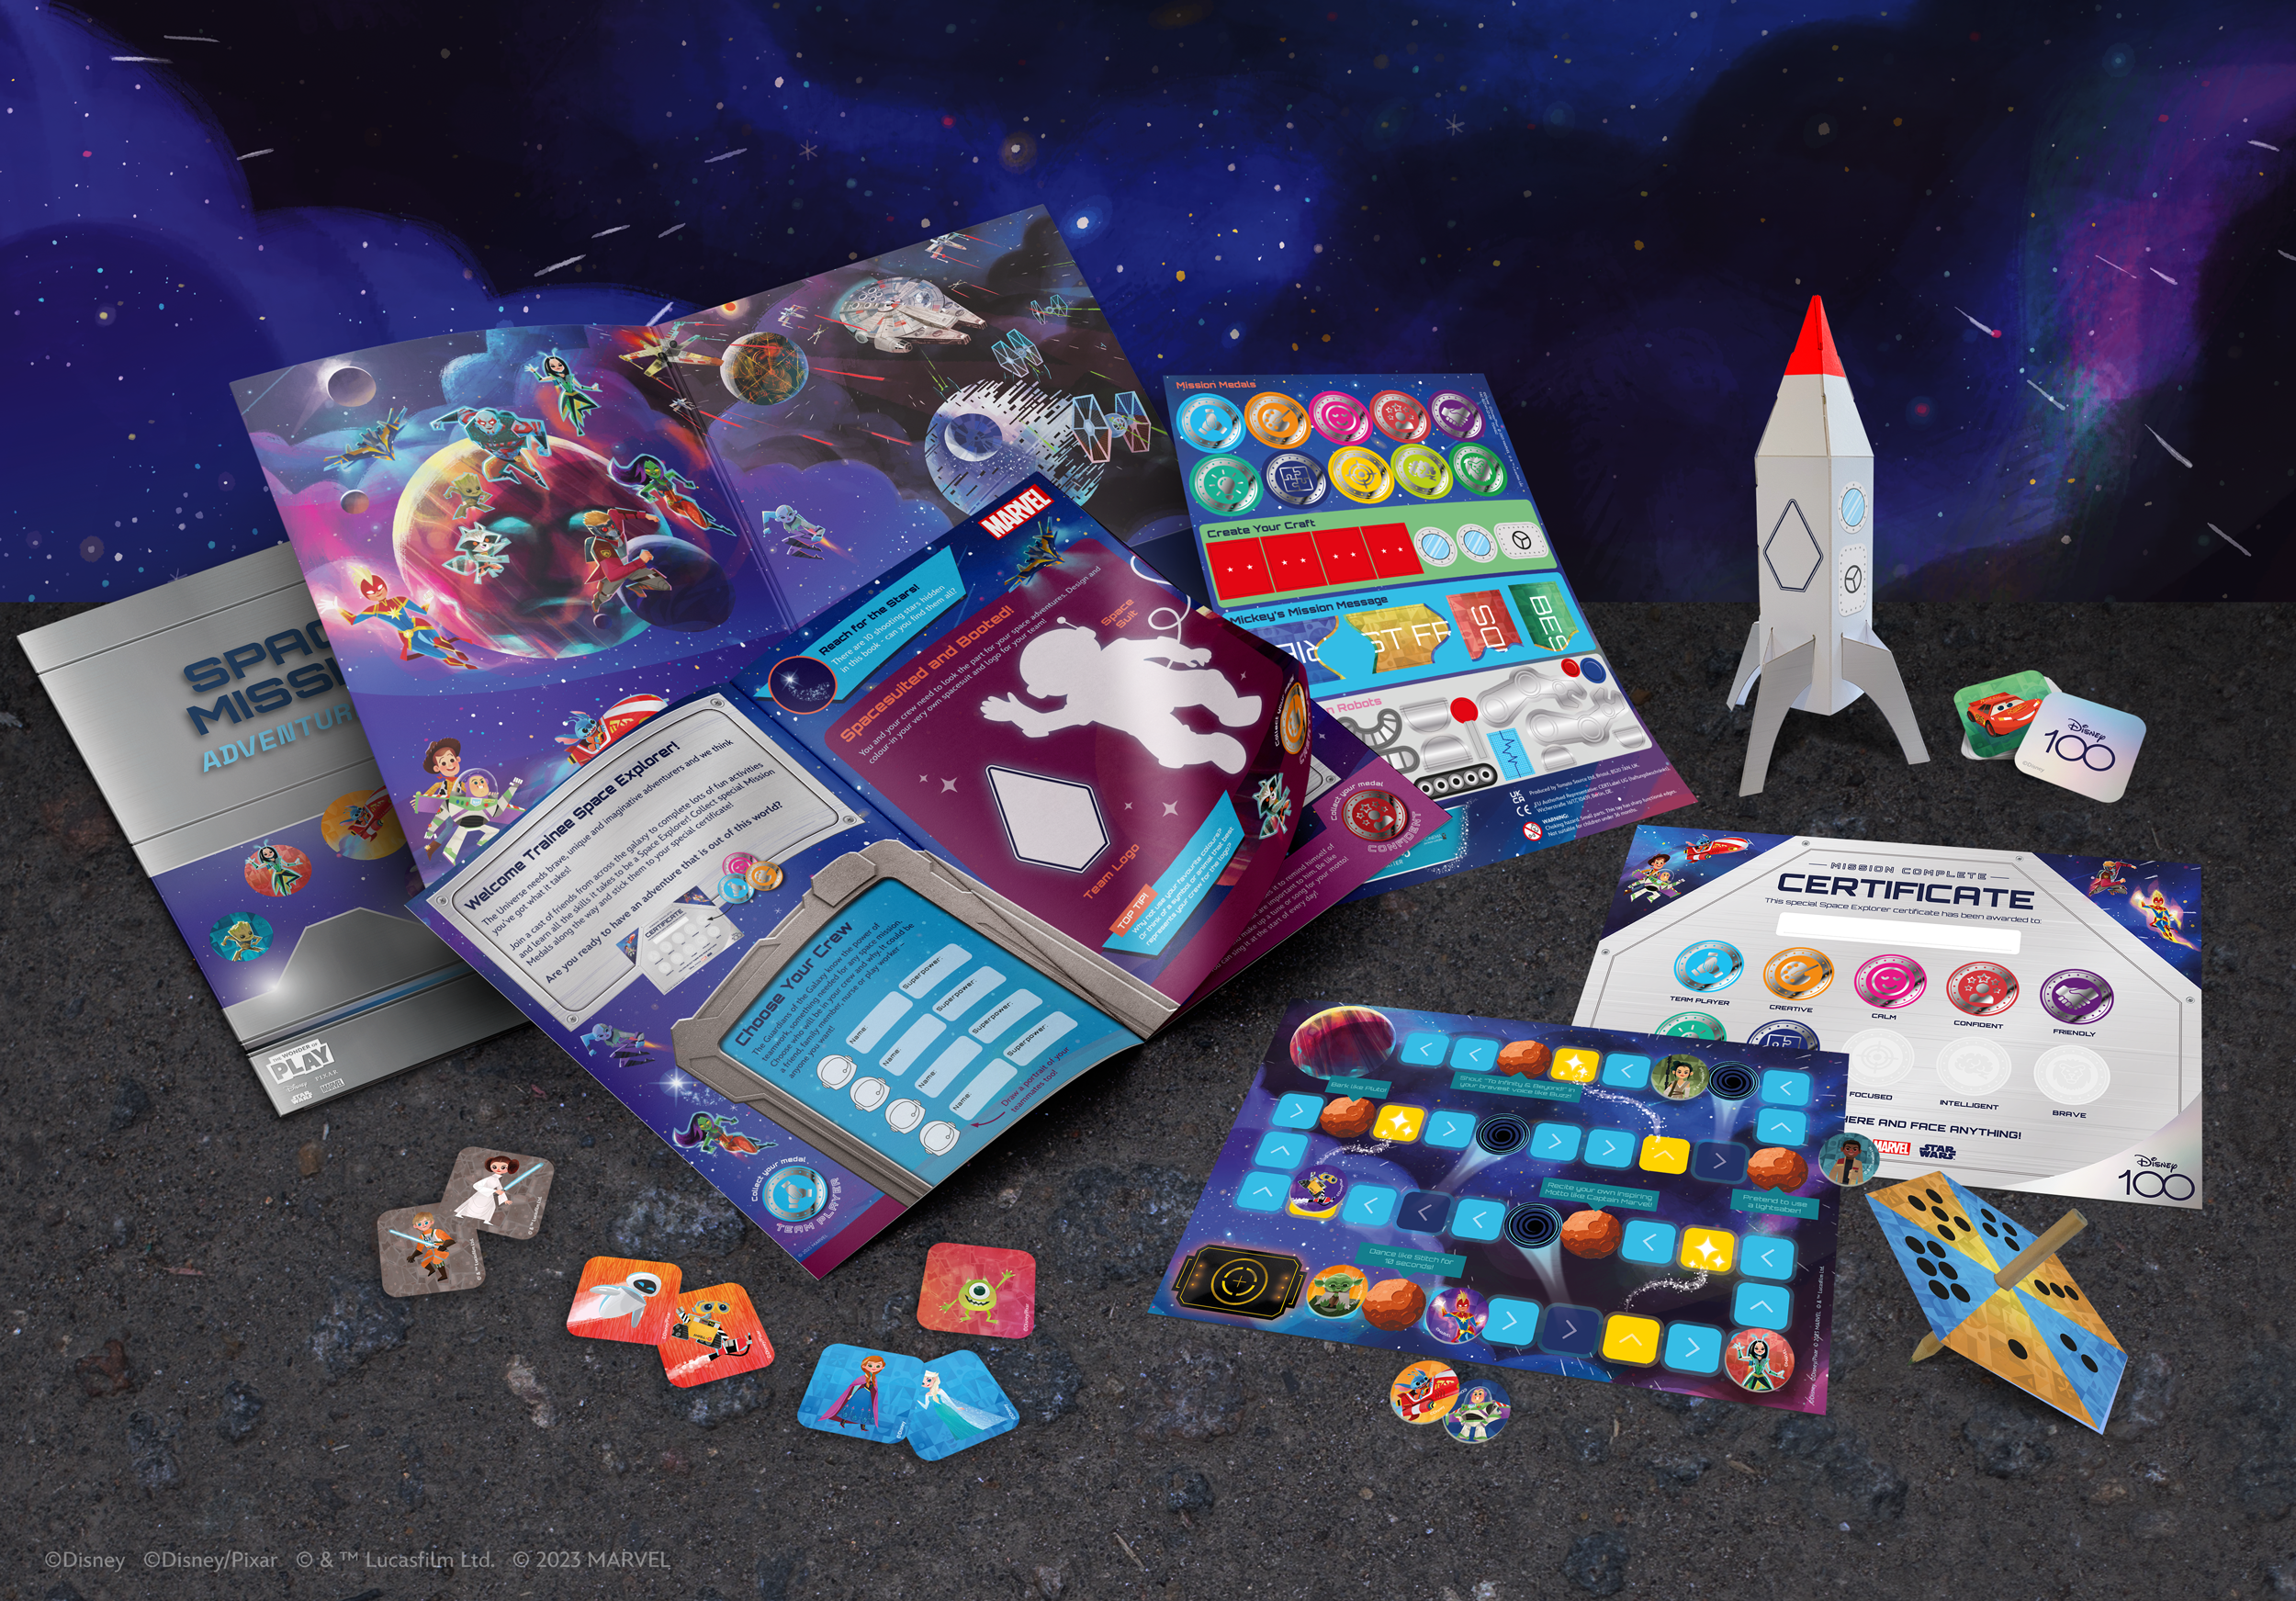 Disney EMEA and MediCinema create 40,000 Wonder of Space Mission Play Packs as a part of Disney’s Wonder of Play Campaign